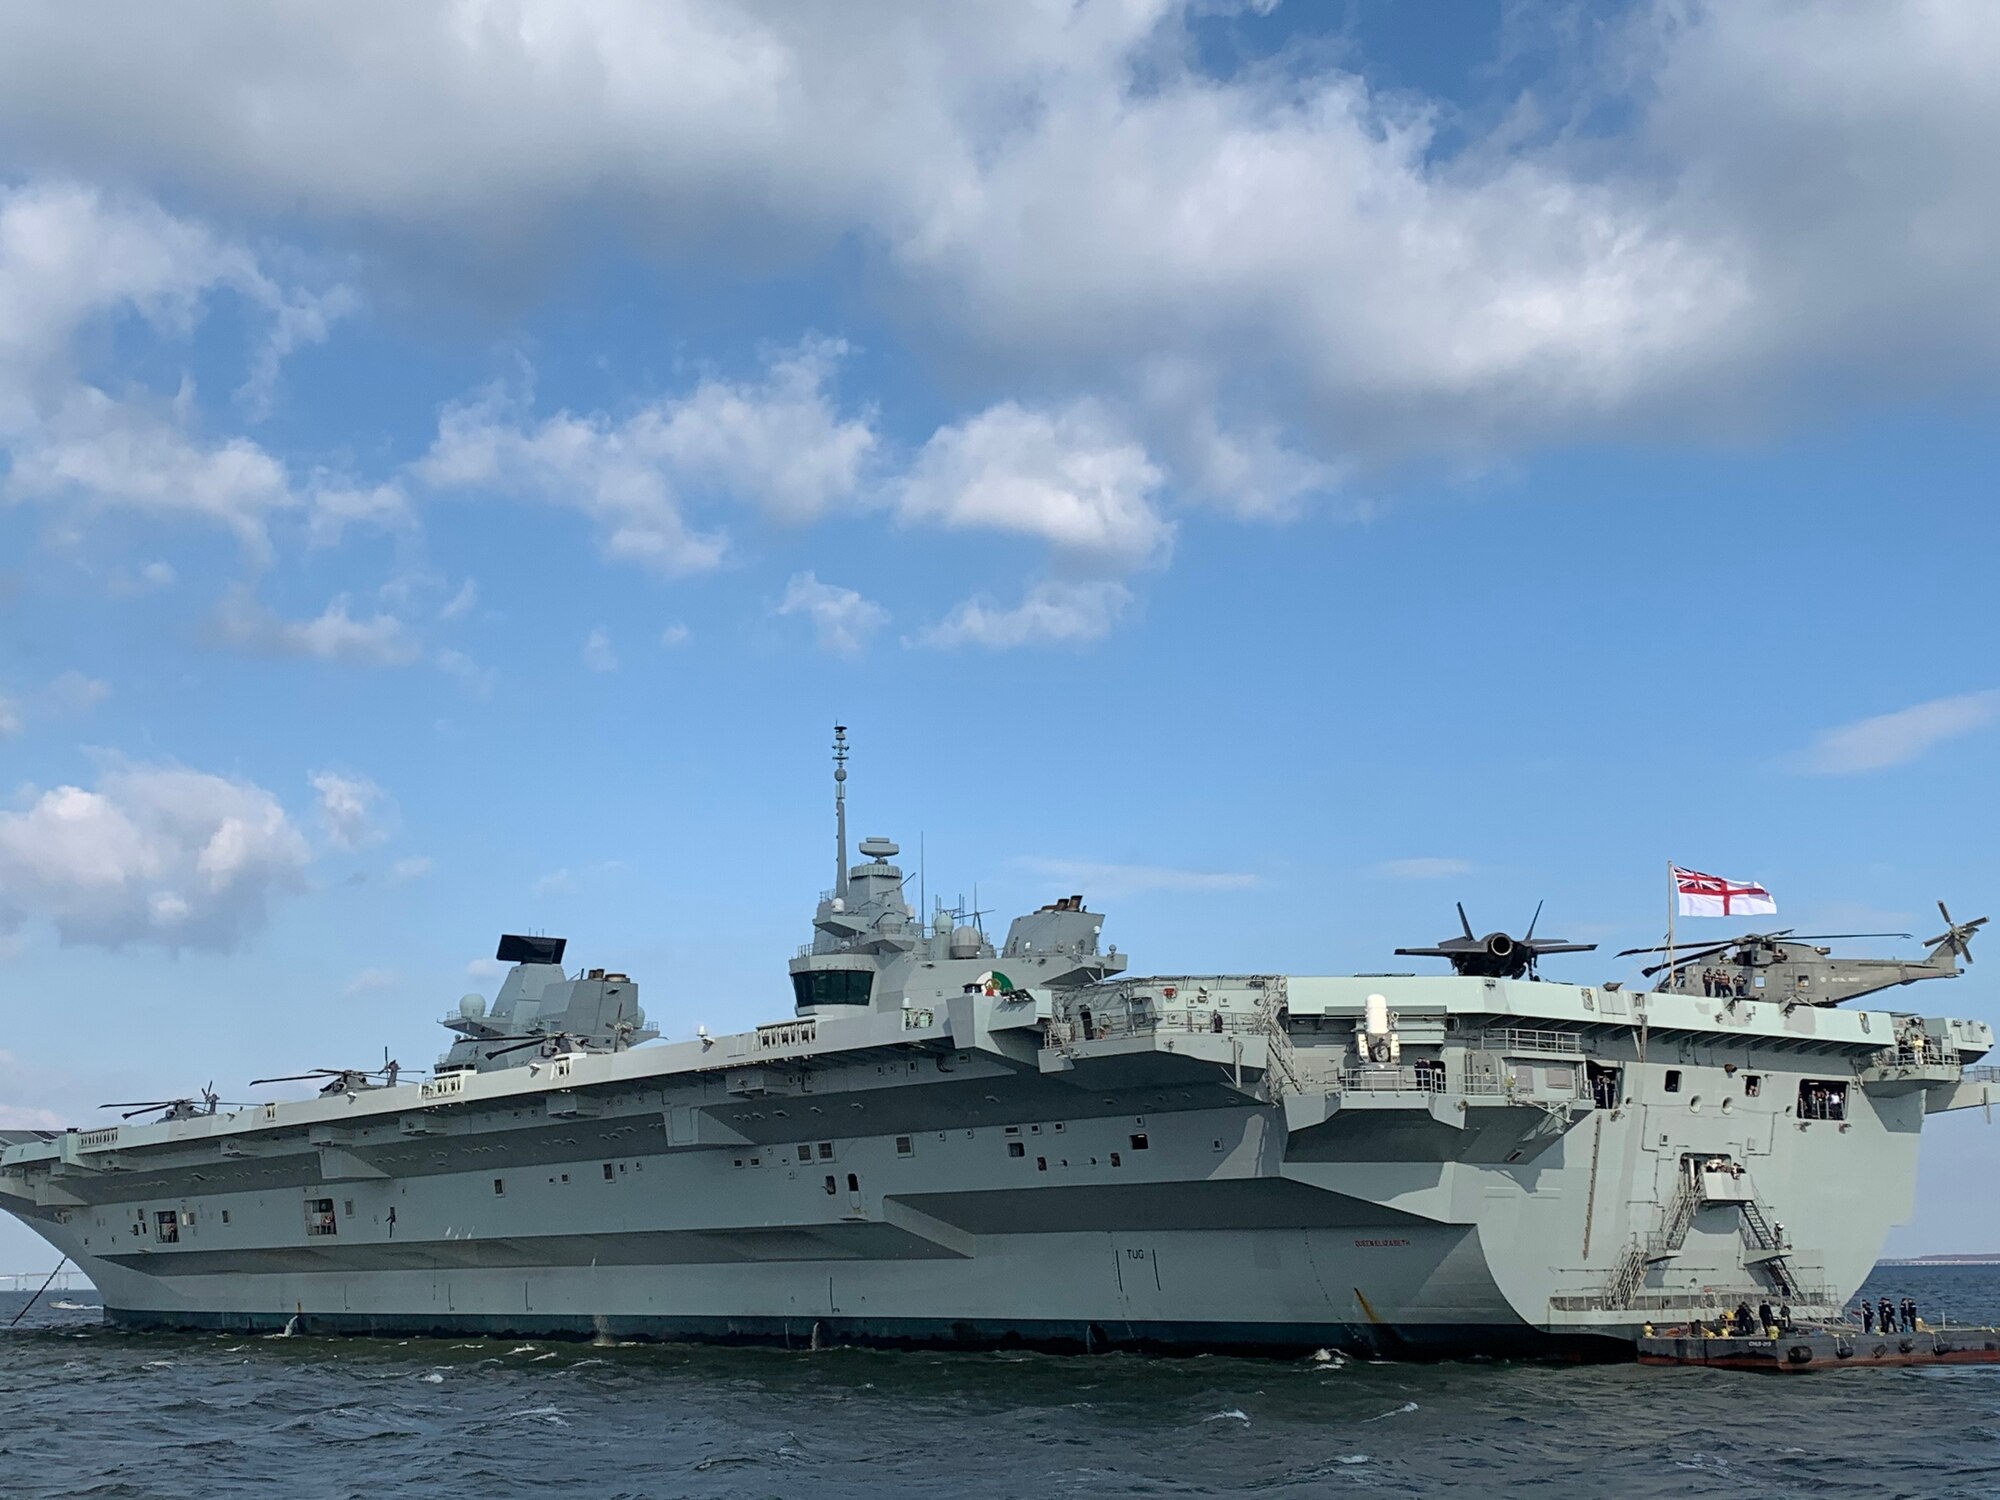 The HMS Queen Elizabeth is the largest and most powerful vessel ever constructed for the Royal Navy. The warship is capable of carrying up to 40 aircraft. The flight deck of HMS Queen Elizabeth is an enormous four acres, and will be used to launch the new F-35 Joint Strike Fighter fast jet. (Courtesy photo)